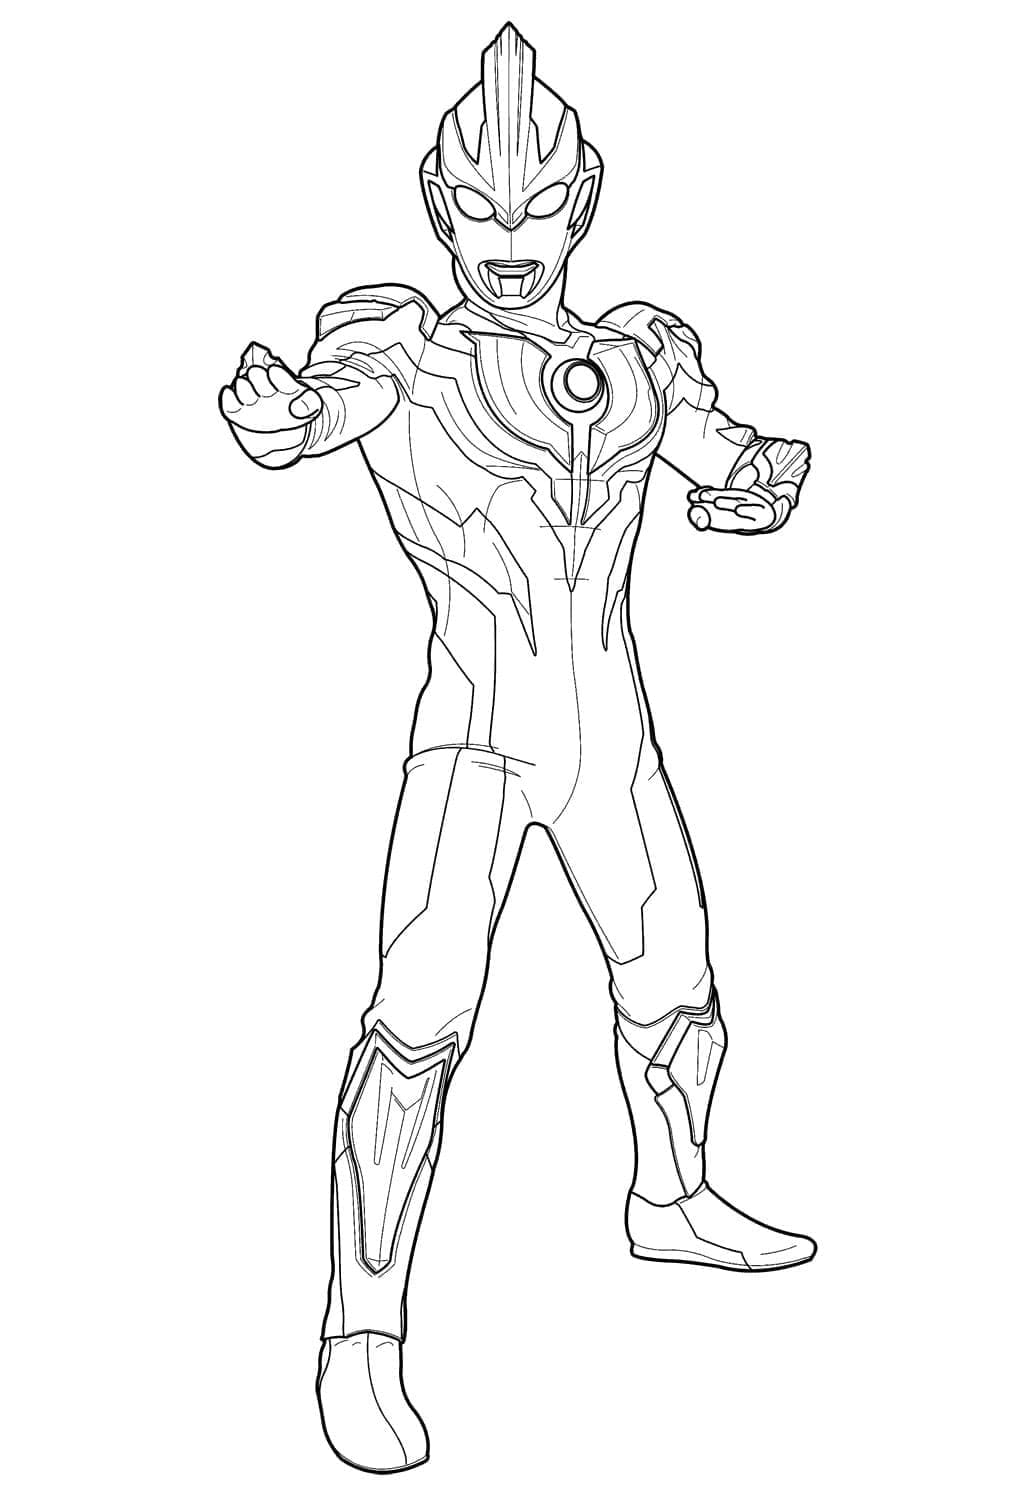 Ultraman 10 coloring page